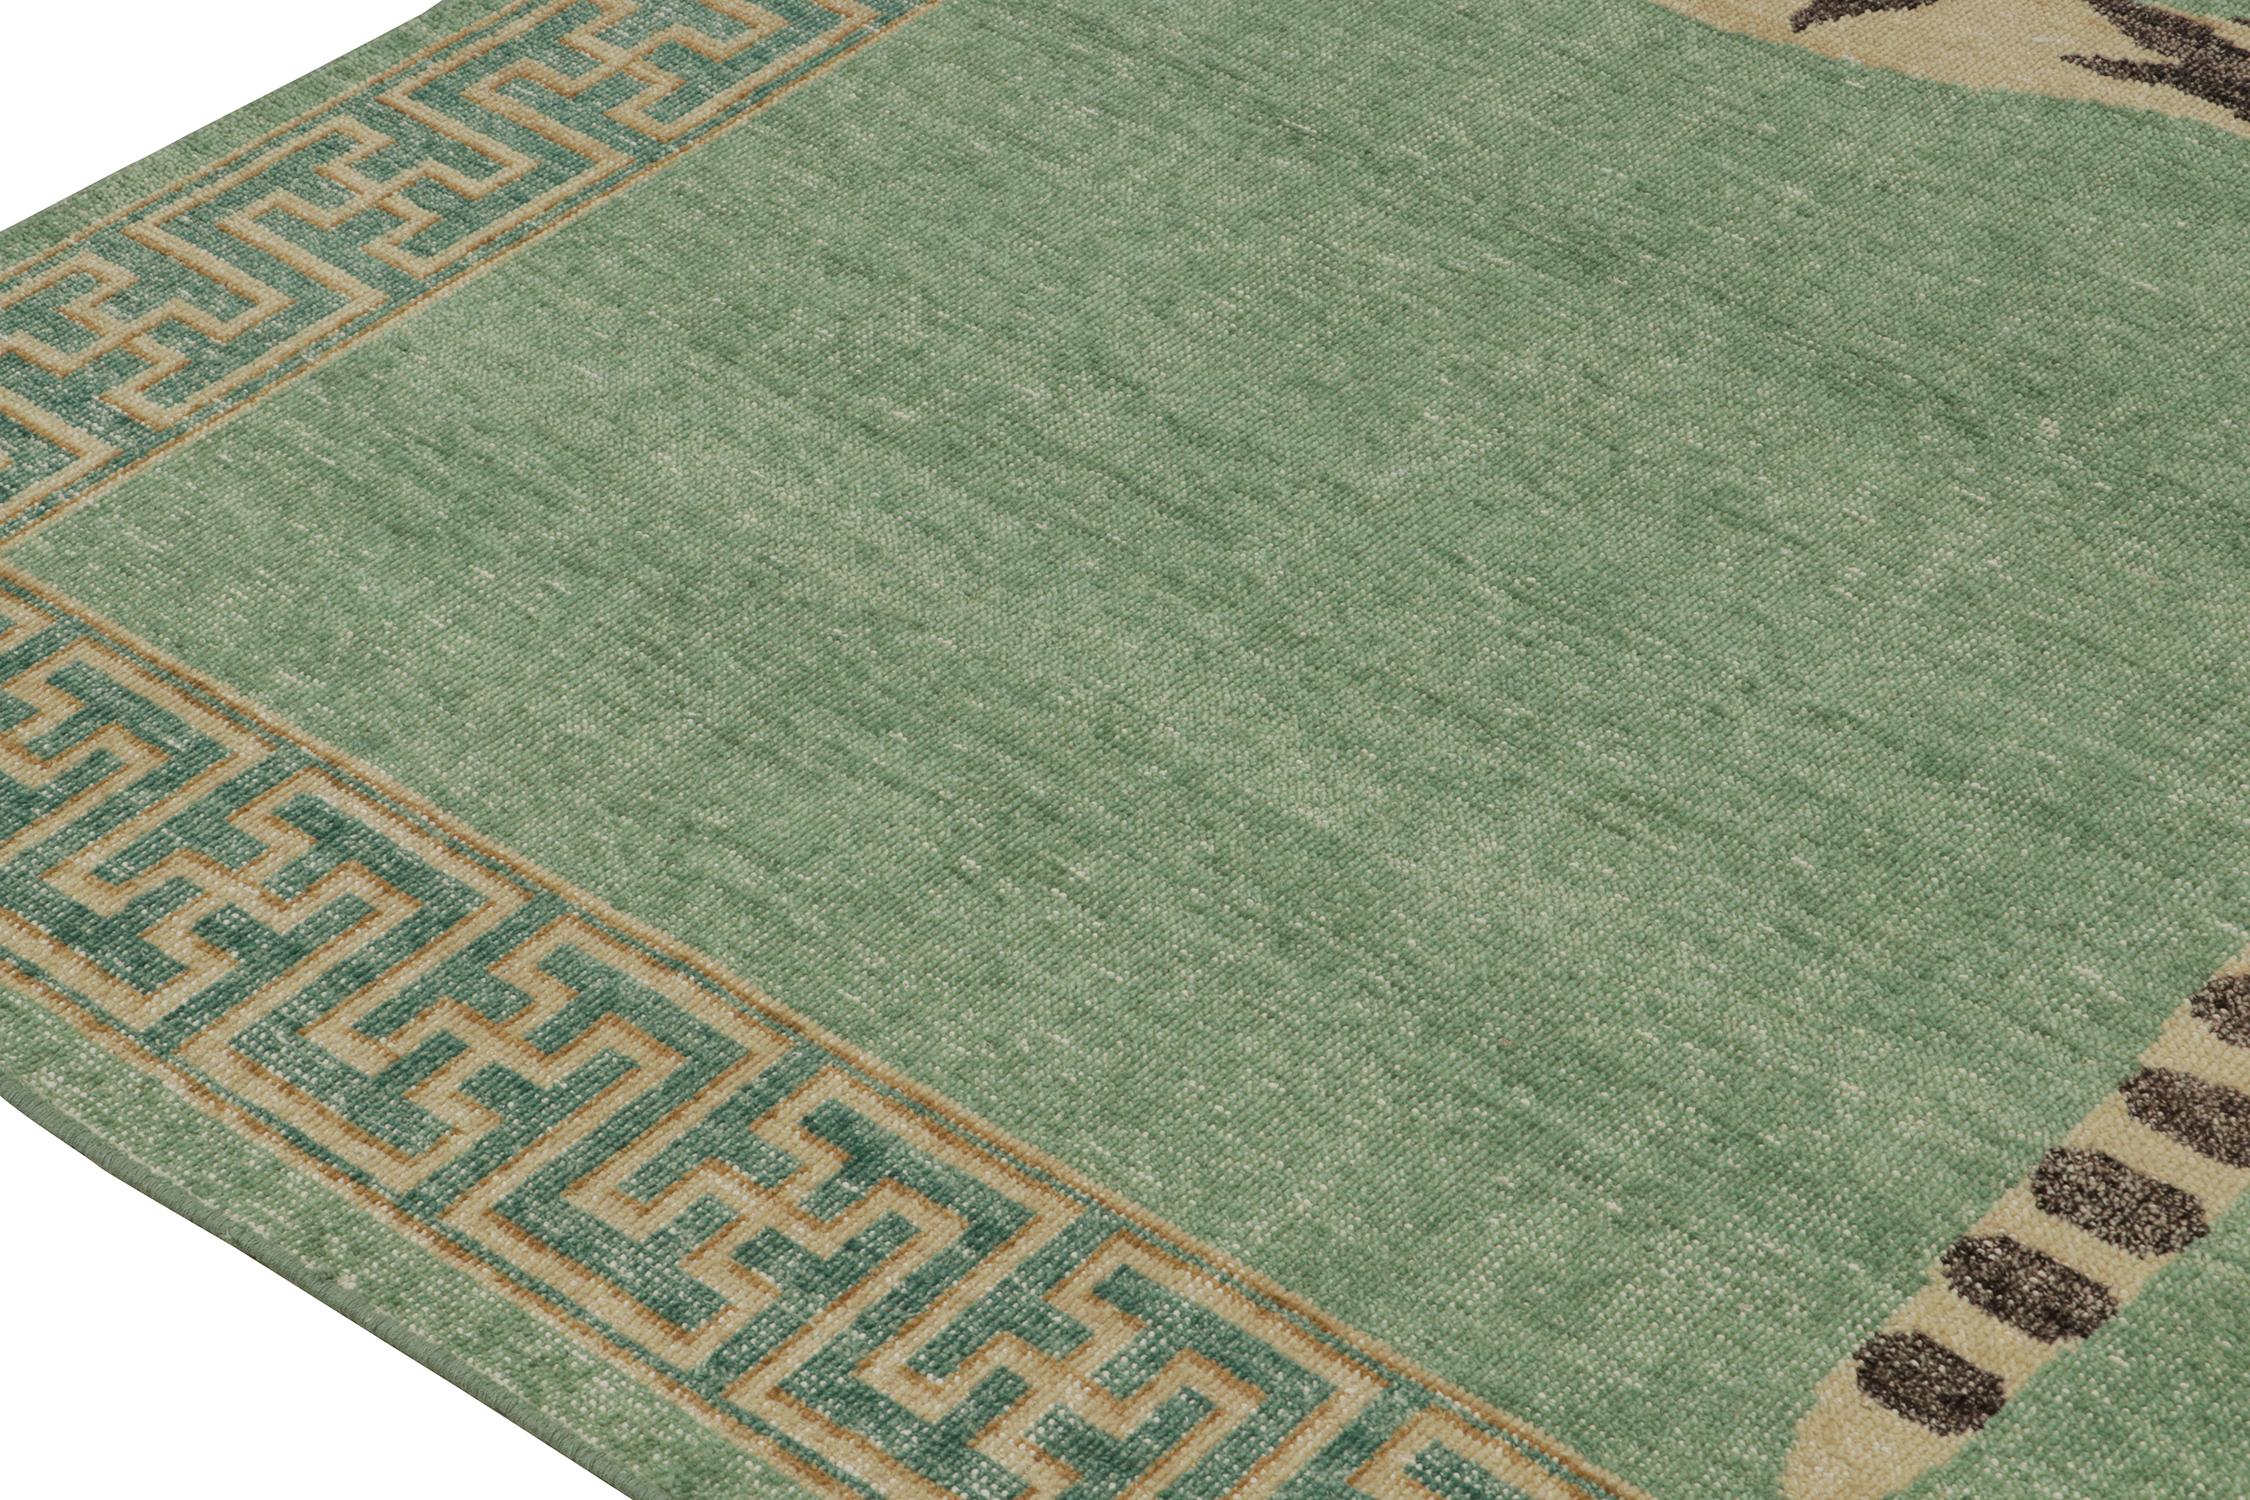 Rug & Kilim's Distressed Style Tiger Skin Rug in Green, Beige & Black Pictorial (en anglais)  Neuf - En vente à Long Island City, NY